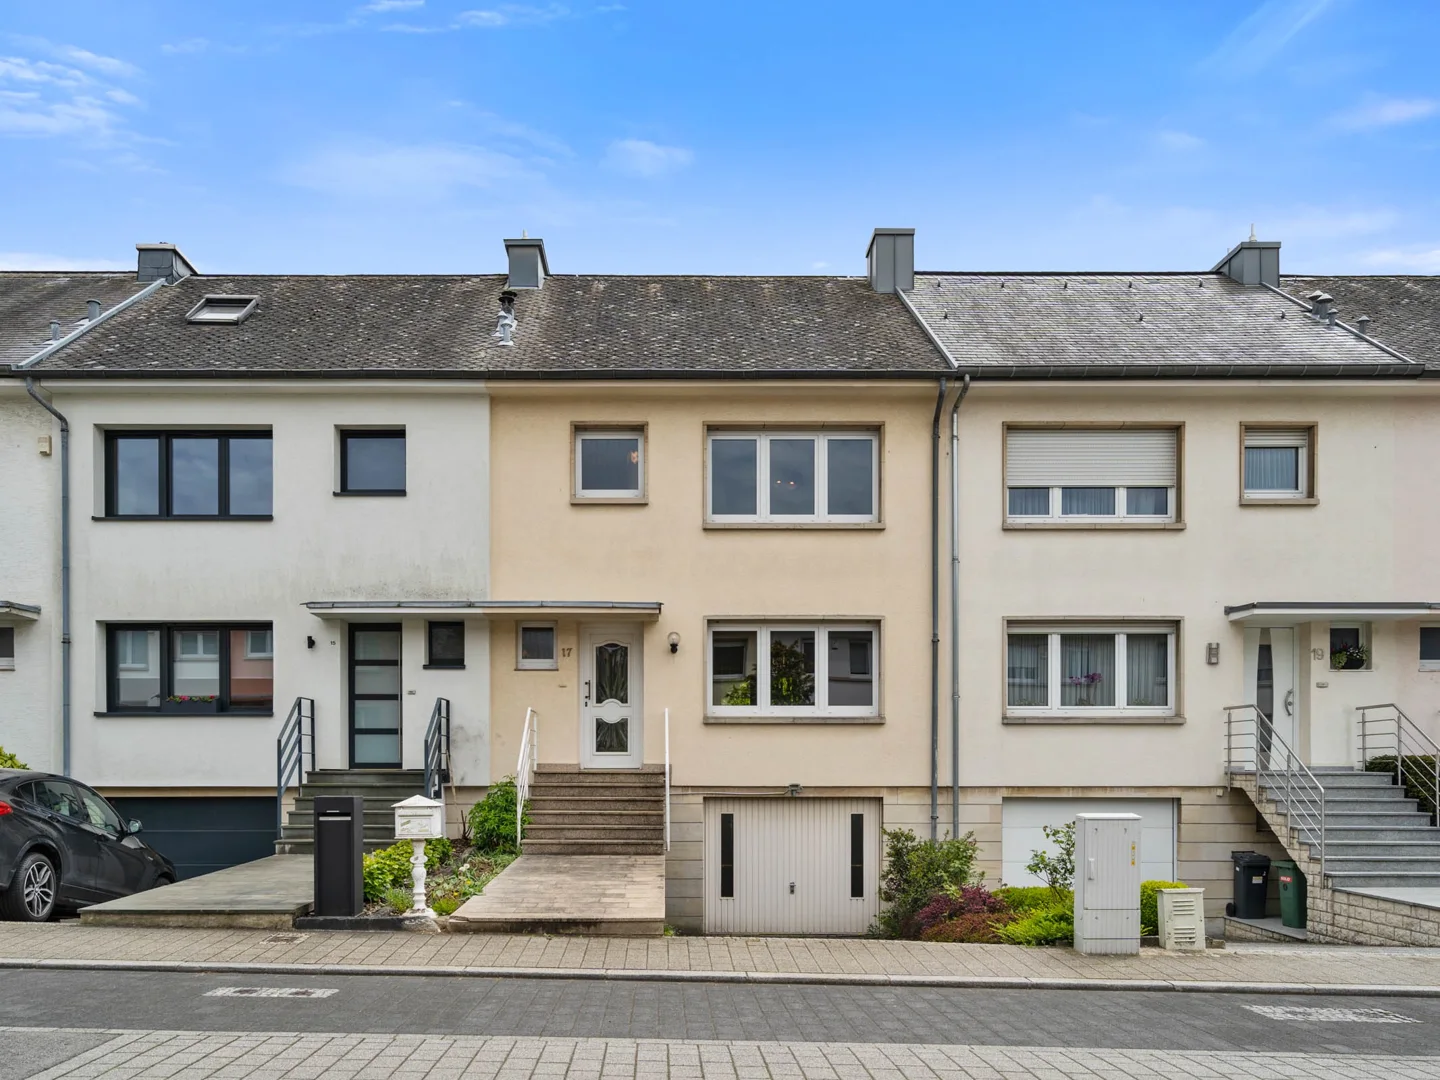 Terraced house to renovate in Strassen